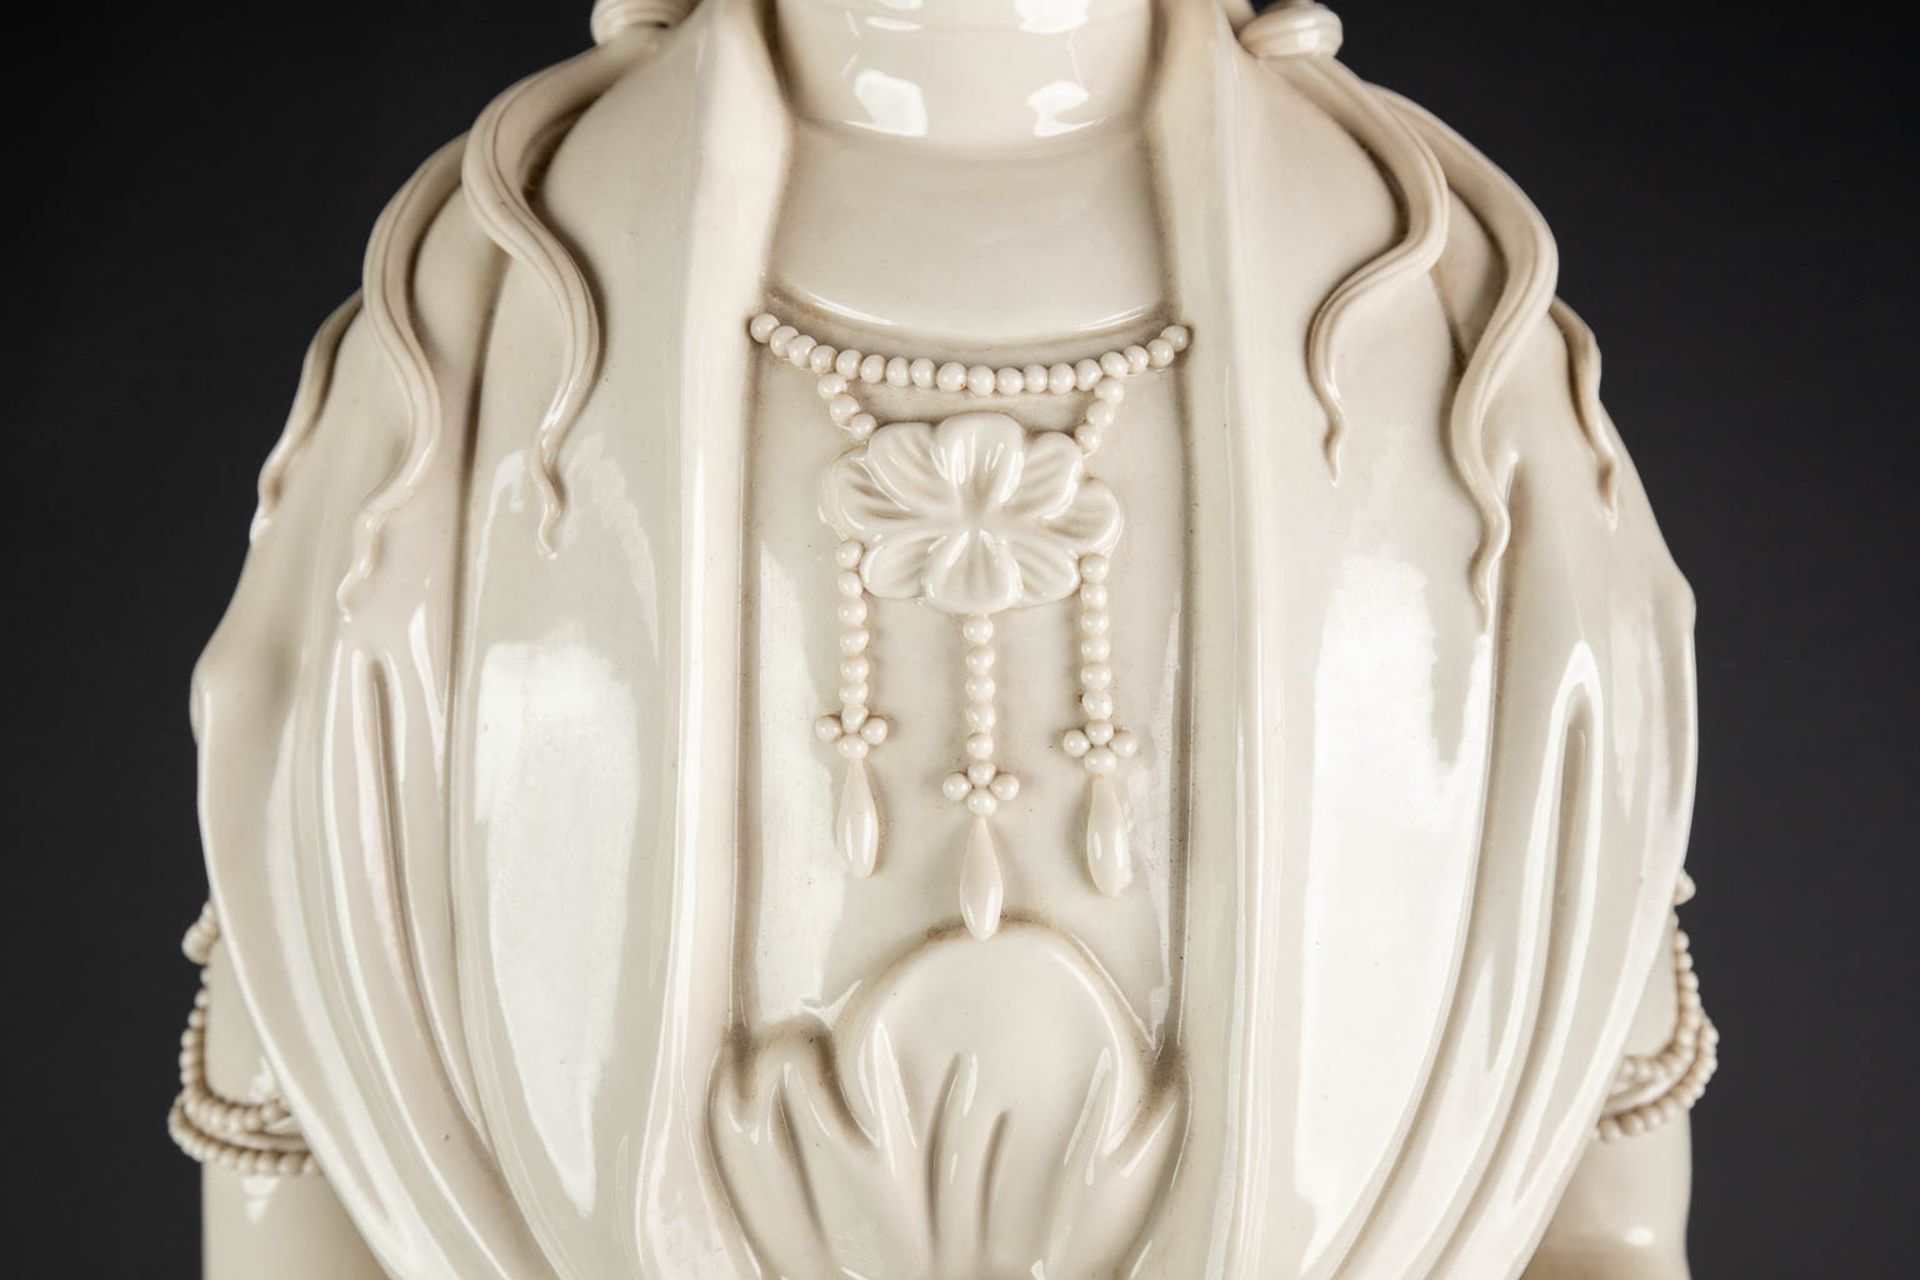 A large Chinese Guanyin figurine, blanc de chine porcelain. 20th C. (D:20 x W:23 x H:80 cm) - Image 9 of 13